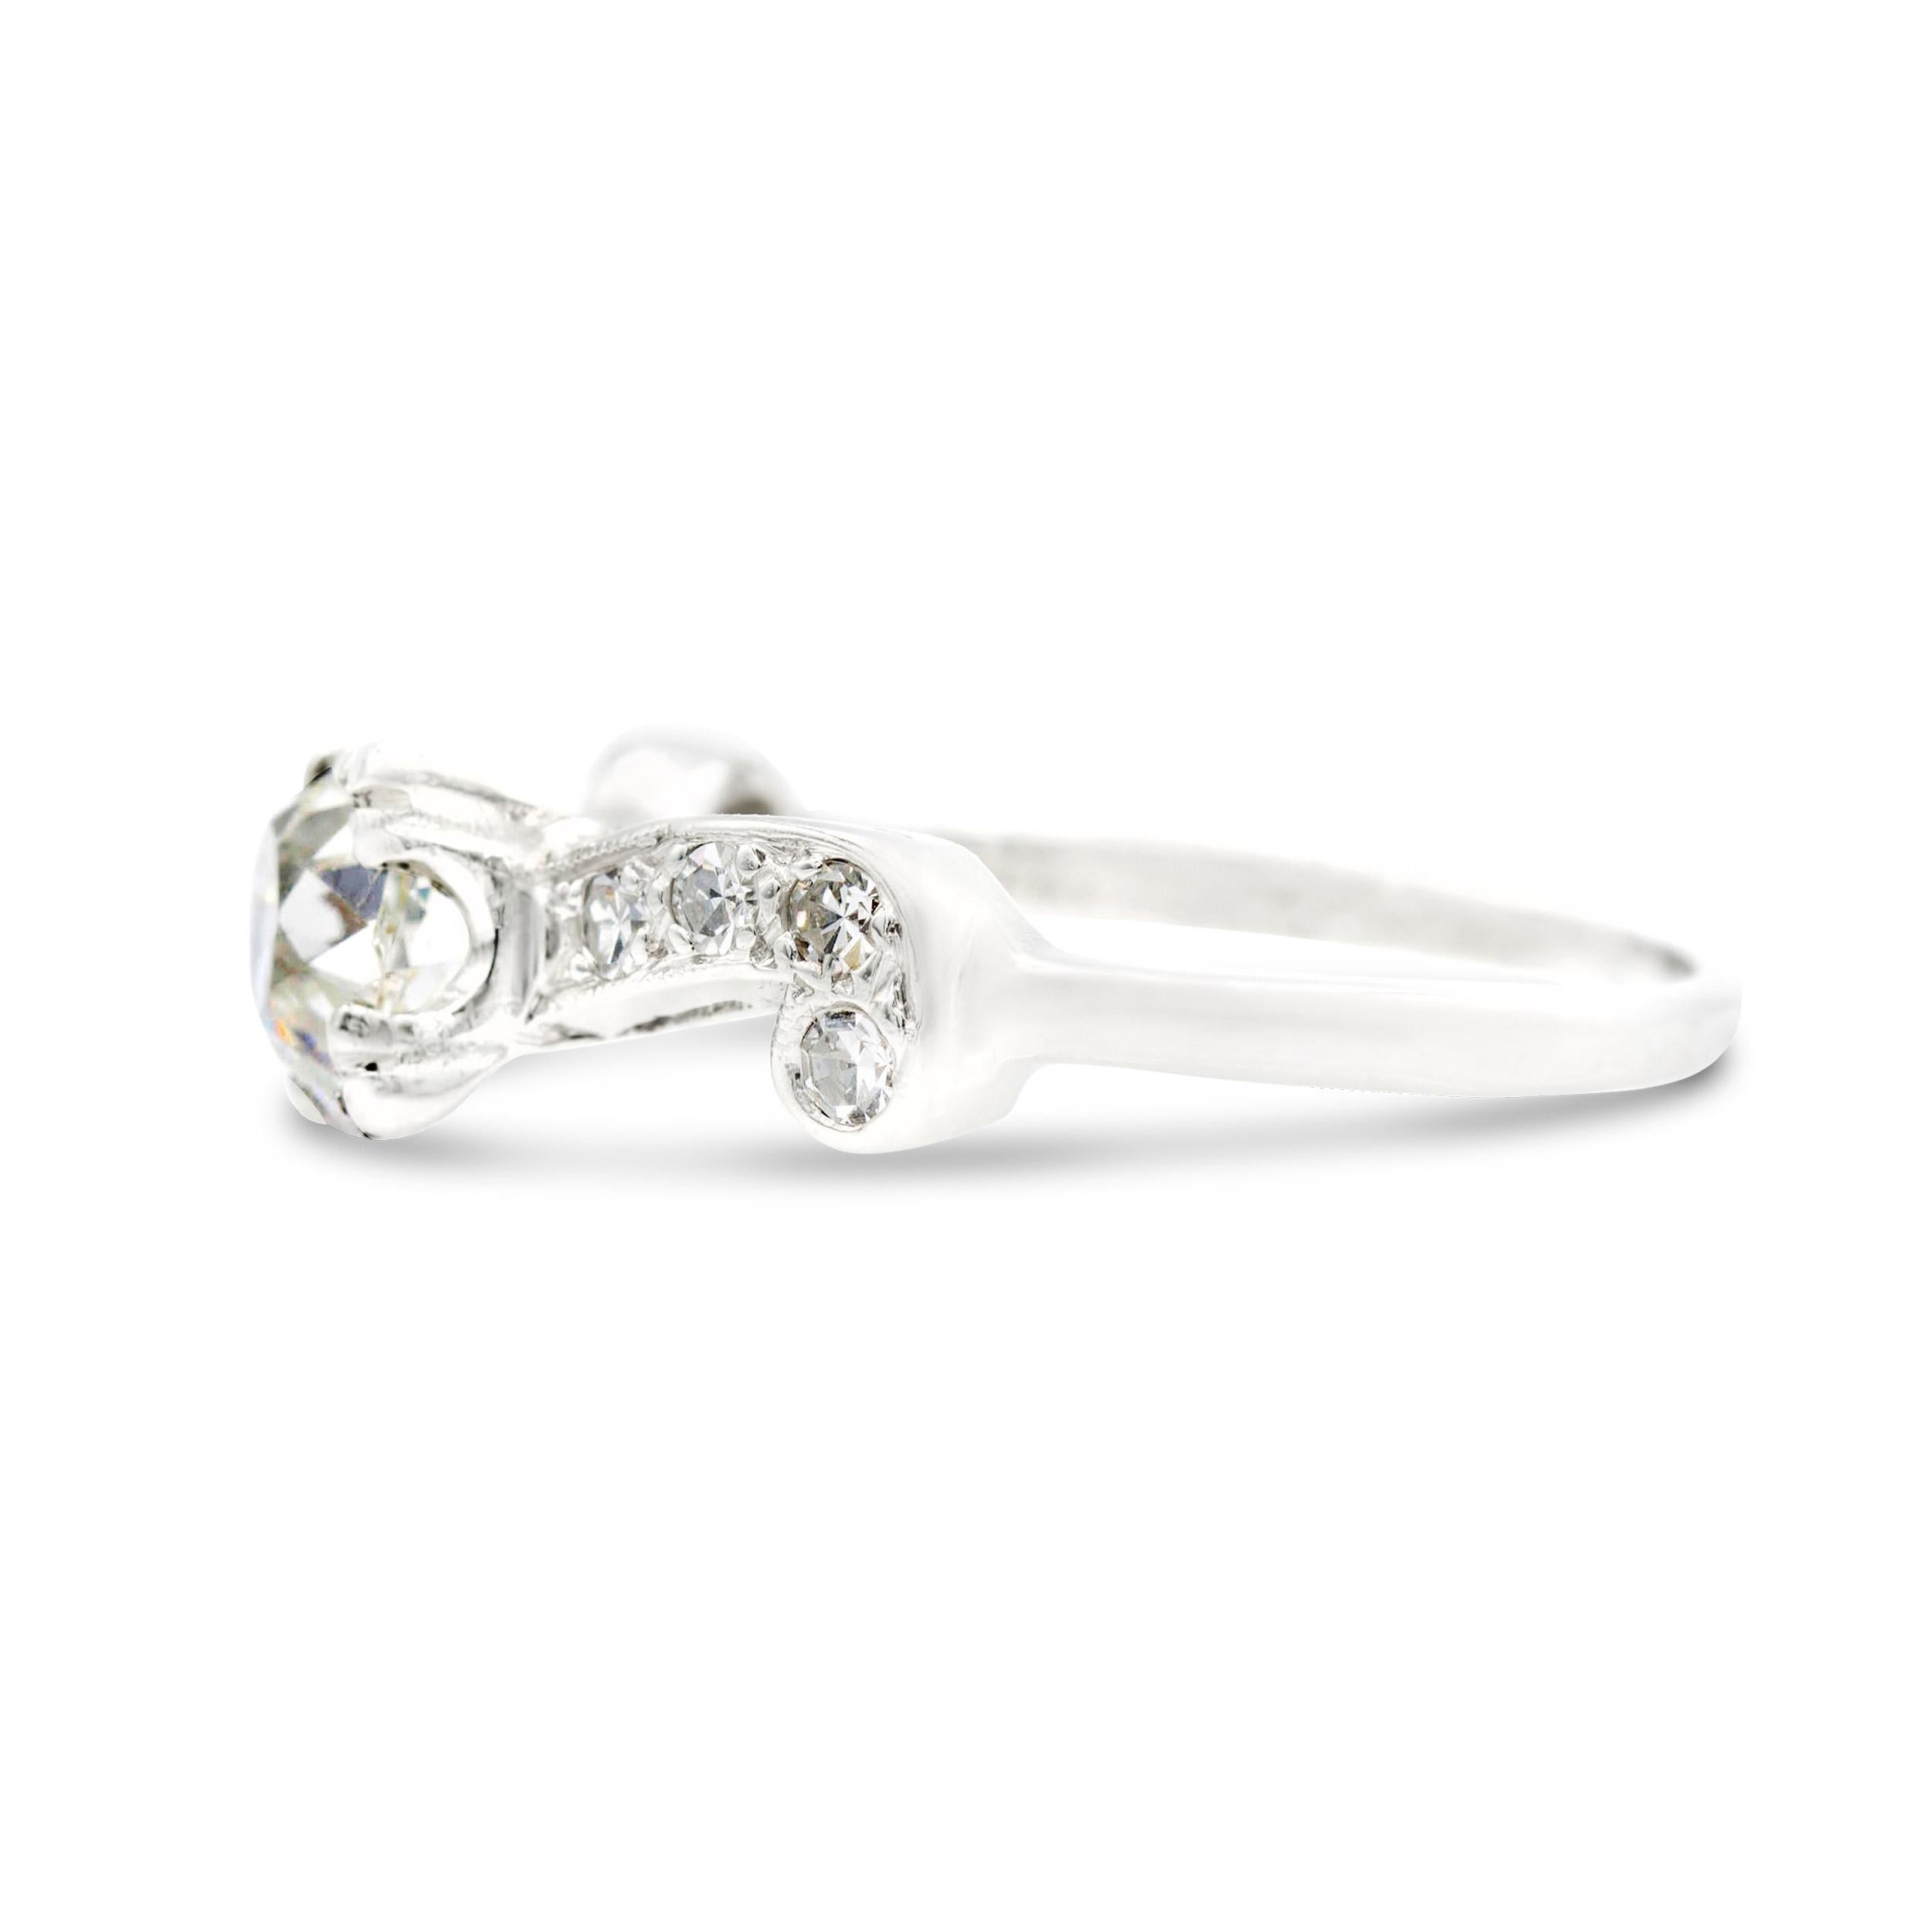 Old Mine Cut Art Deco GIA Certified 1.13 Ct. Old Mine Diamond Engagement Ring G SI2 For Sale